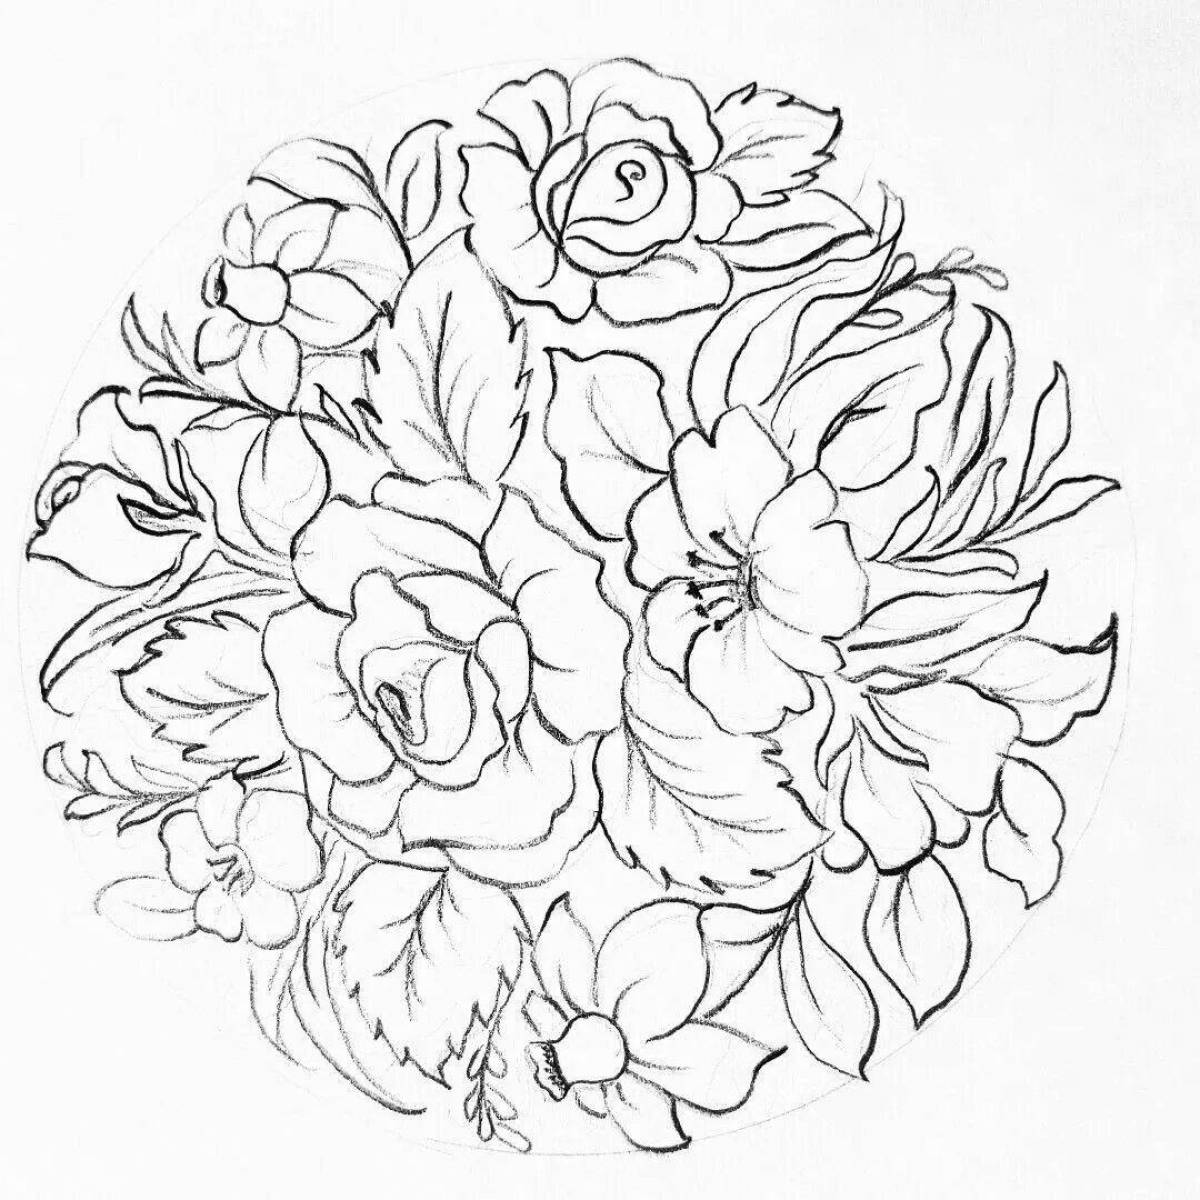 Colorful Zhhostovo flowers coloring book